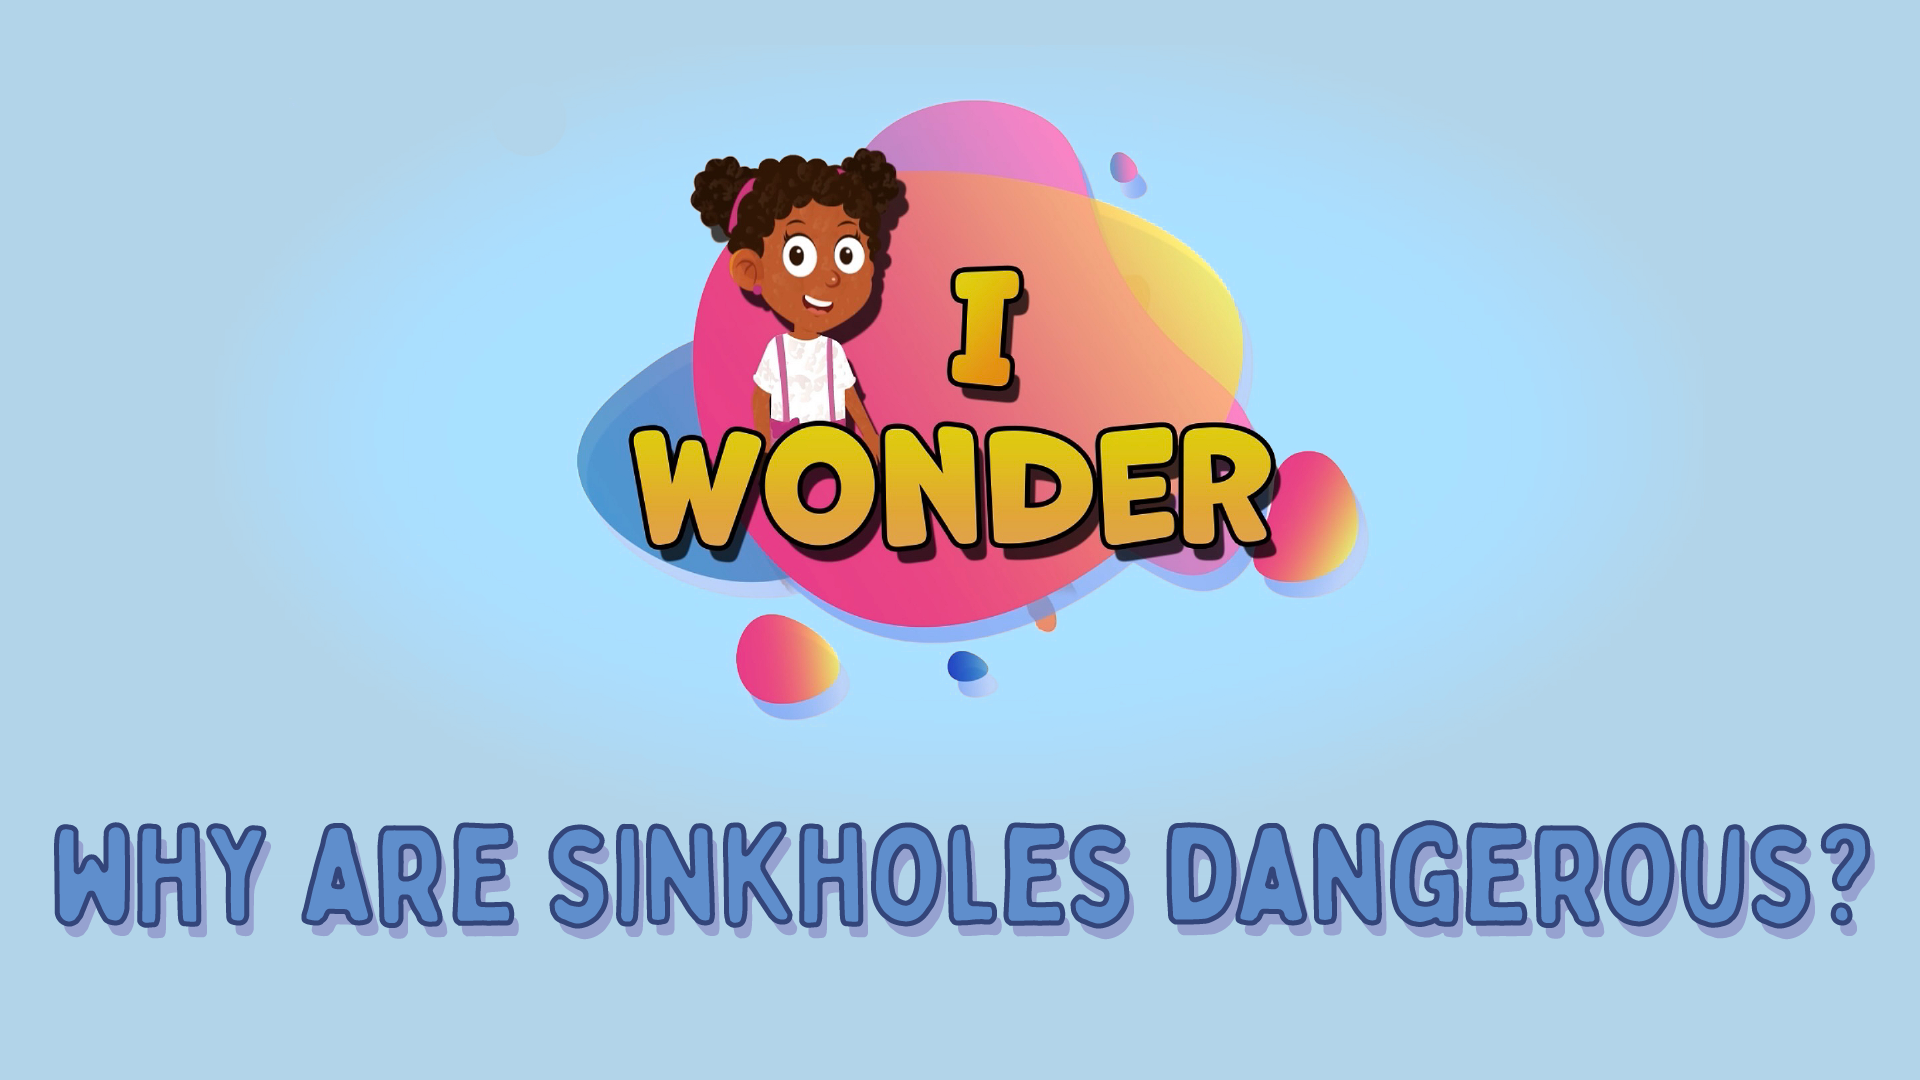 Why Are Sinkholes Dangerous?